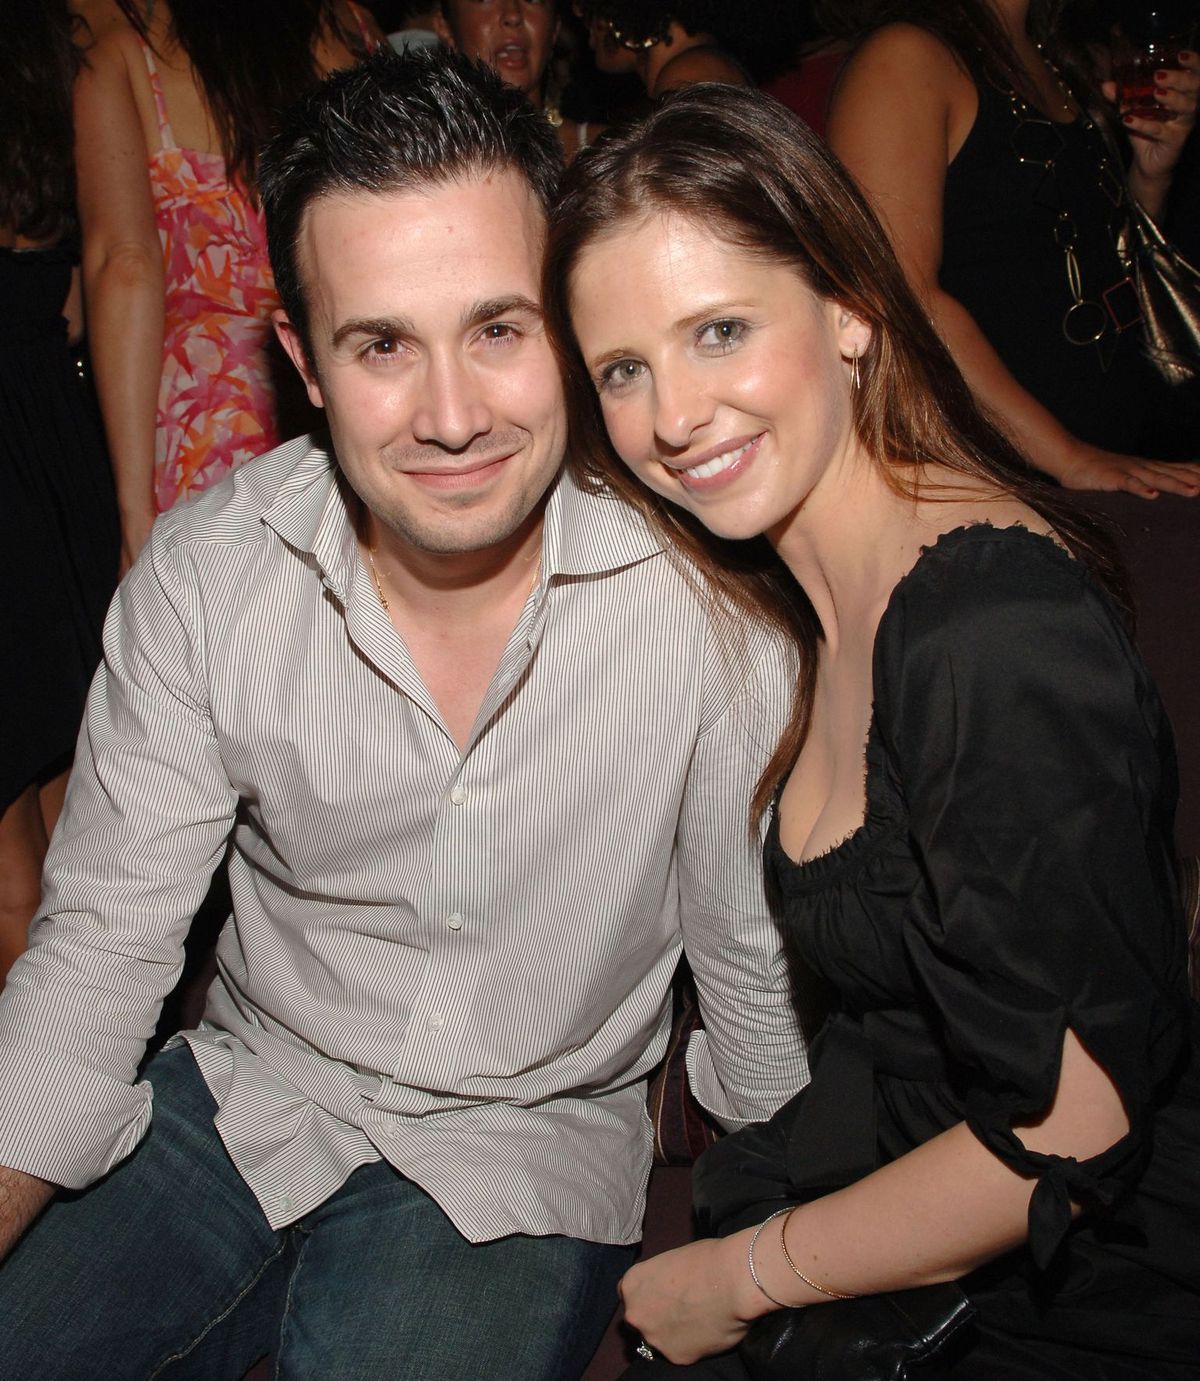 Celebrity couple Freddie Prinze Jr. and Sarah Michelle Gellar at DJ Cassidy's 25th Birthday Party in July 2006. | Photo: Getty Images